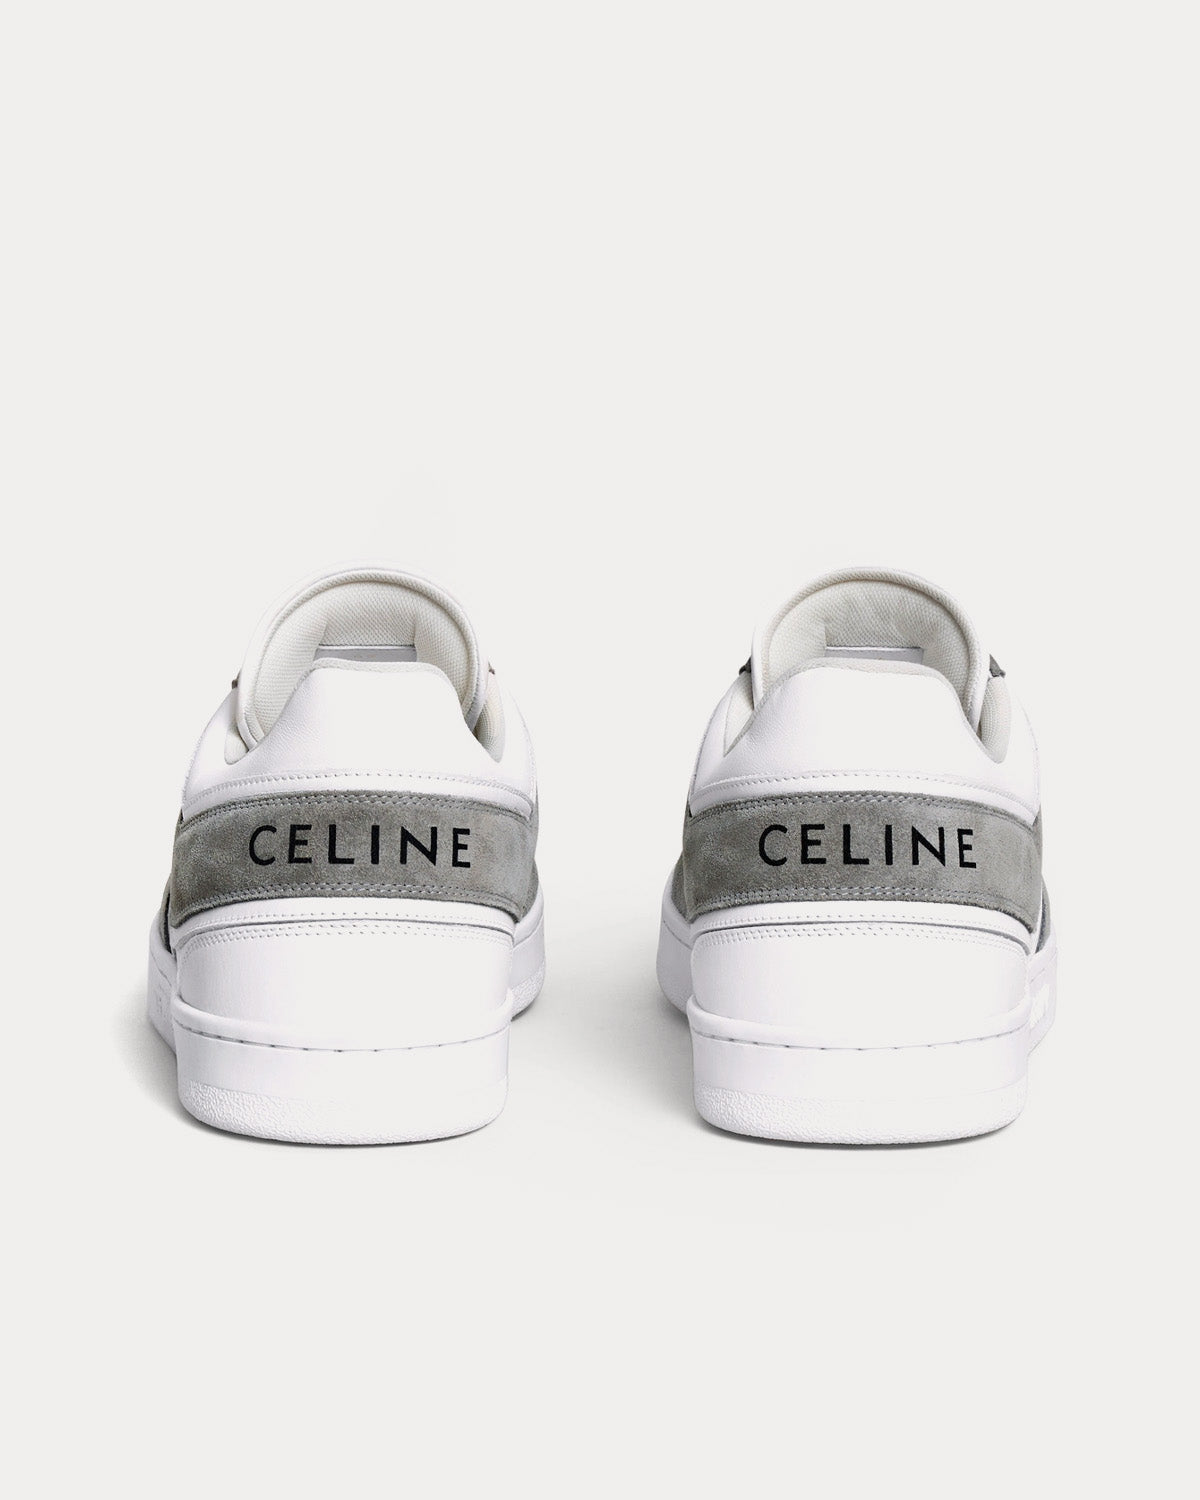 Celine - Lace-Up Suede & Calfskin Leather Grey / Optic White Low Top Sneakers